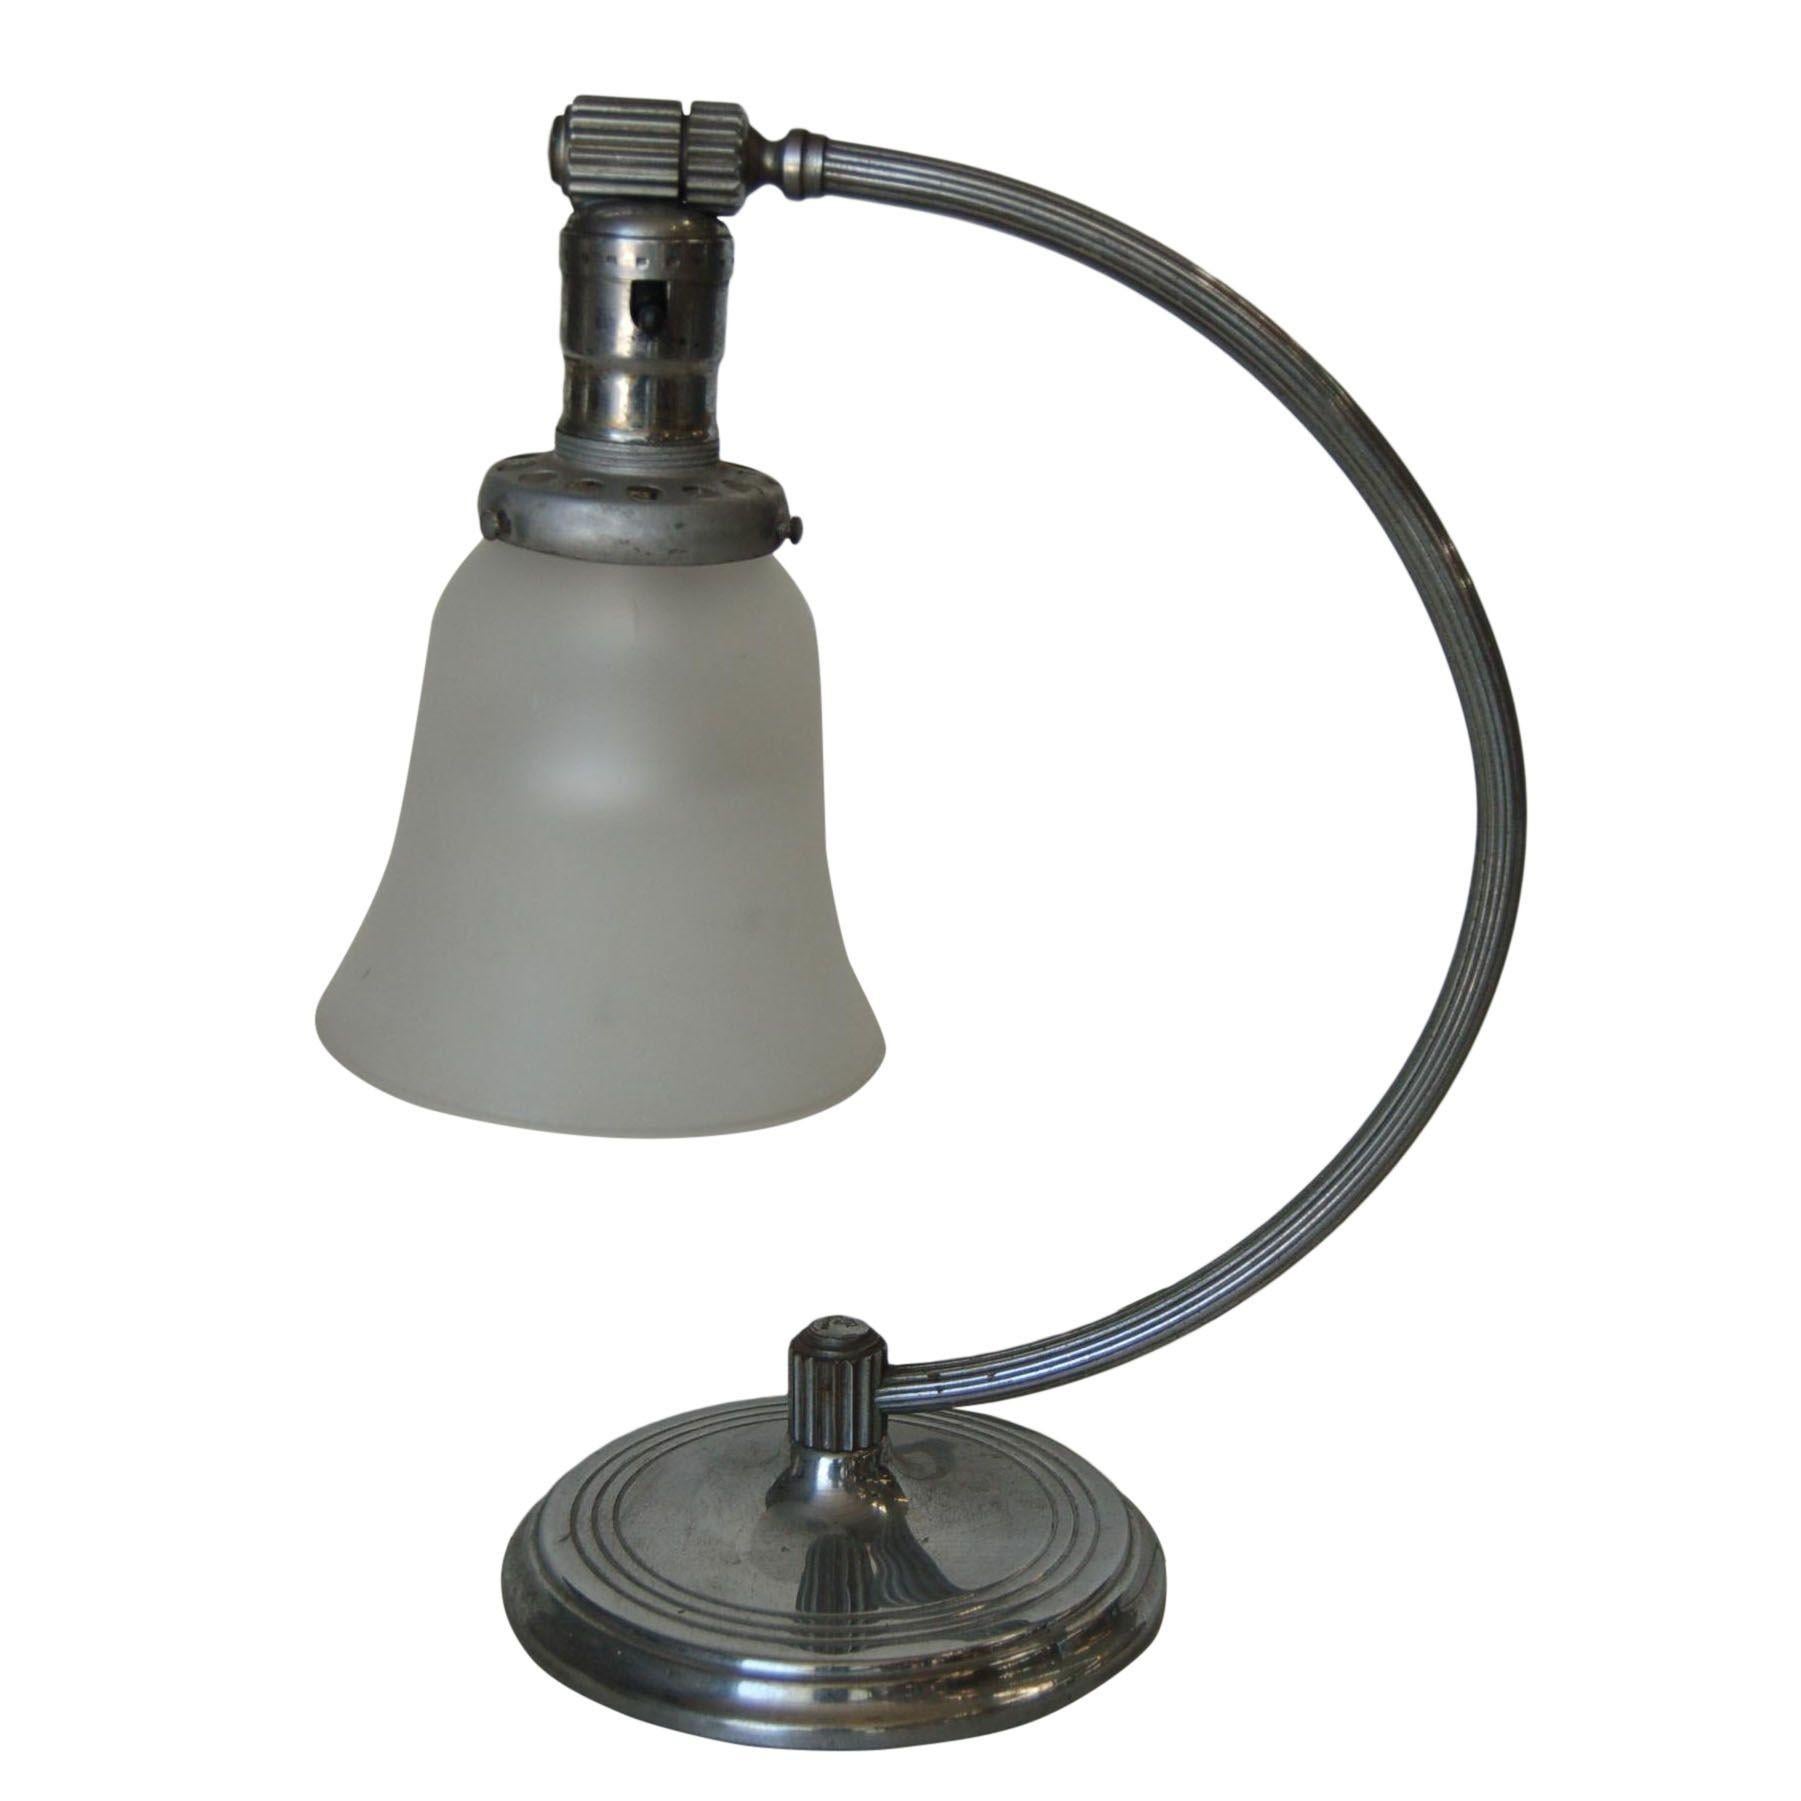 Mid-20th Century Nickel-Plated Accent Table Lamp with Frosted Bell Lamp Shade For Sale